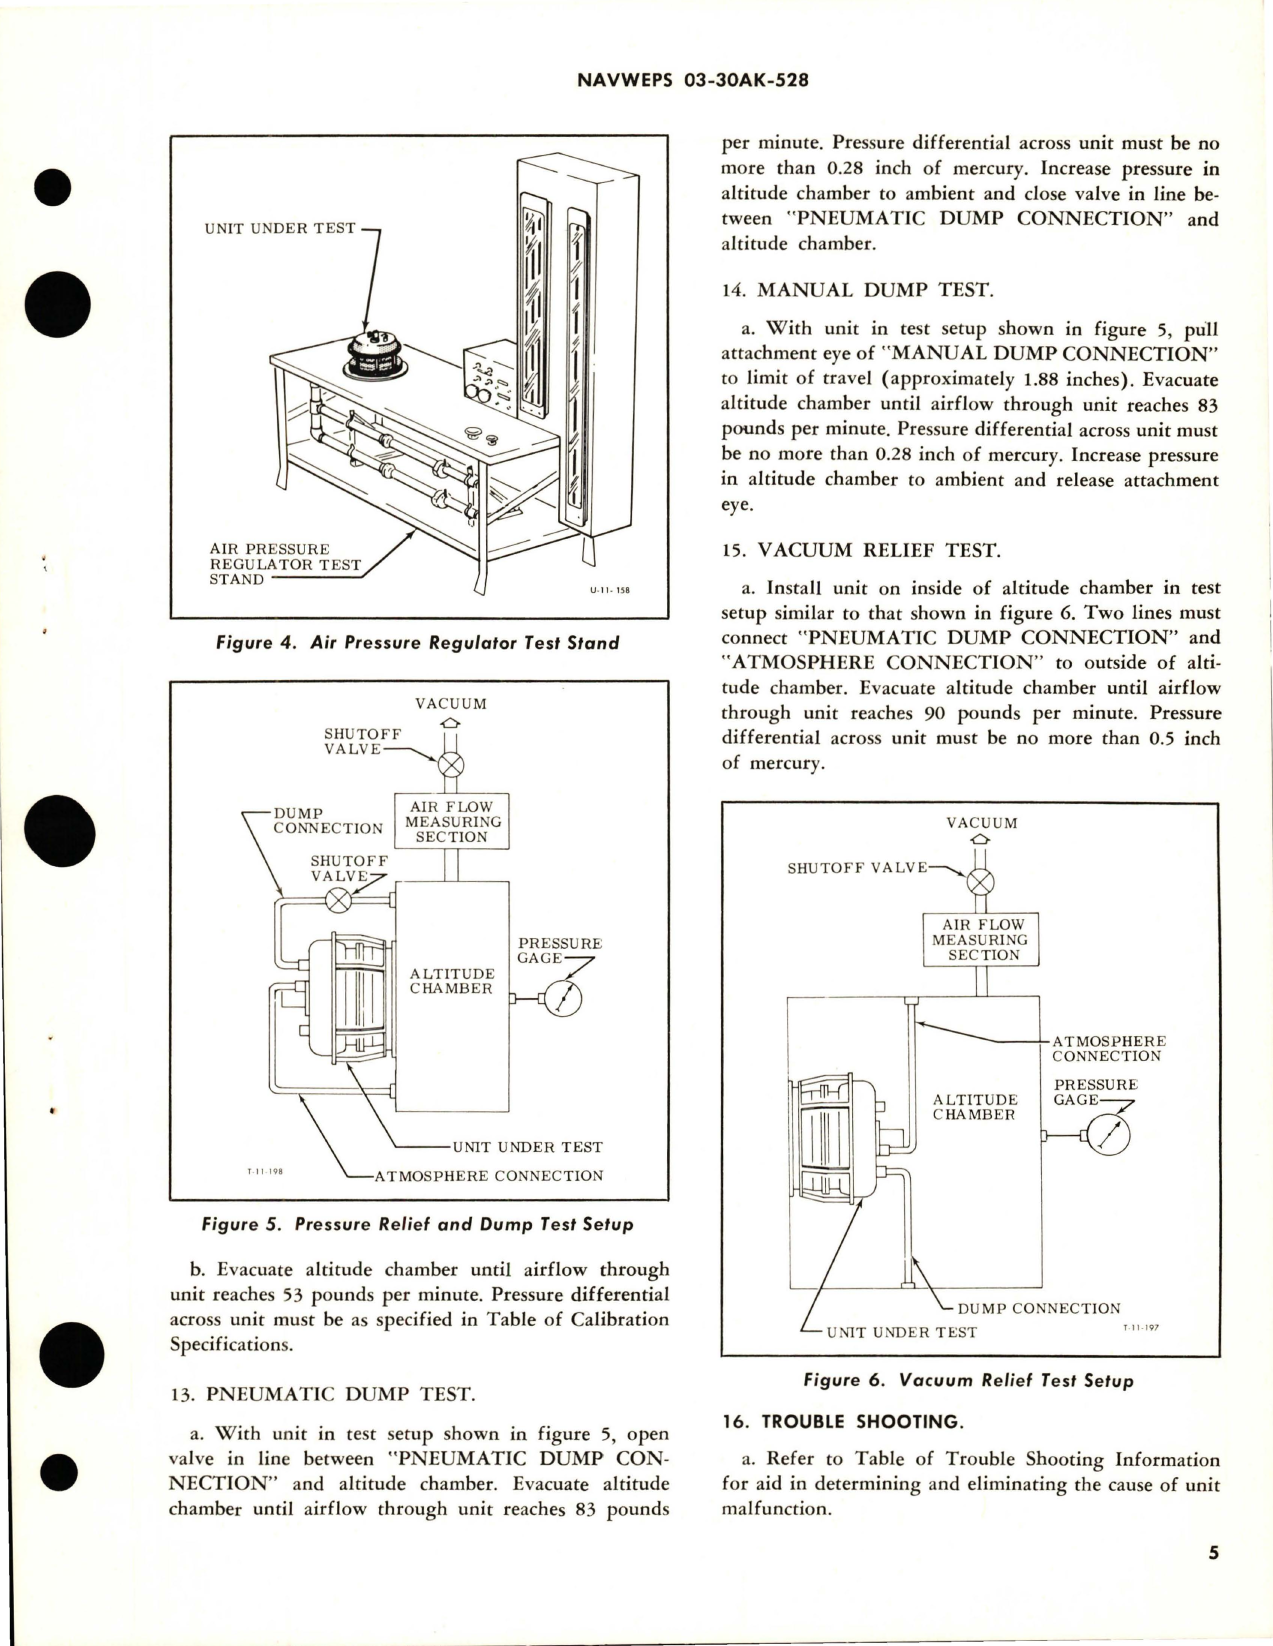 Sample page 7 from AirCorps Library document: Overhaul Instructions with Parts Breakdown for Pressure Relief and Dump Safety Valve - Part 94650-2